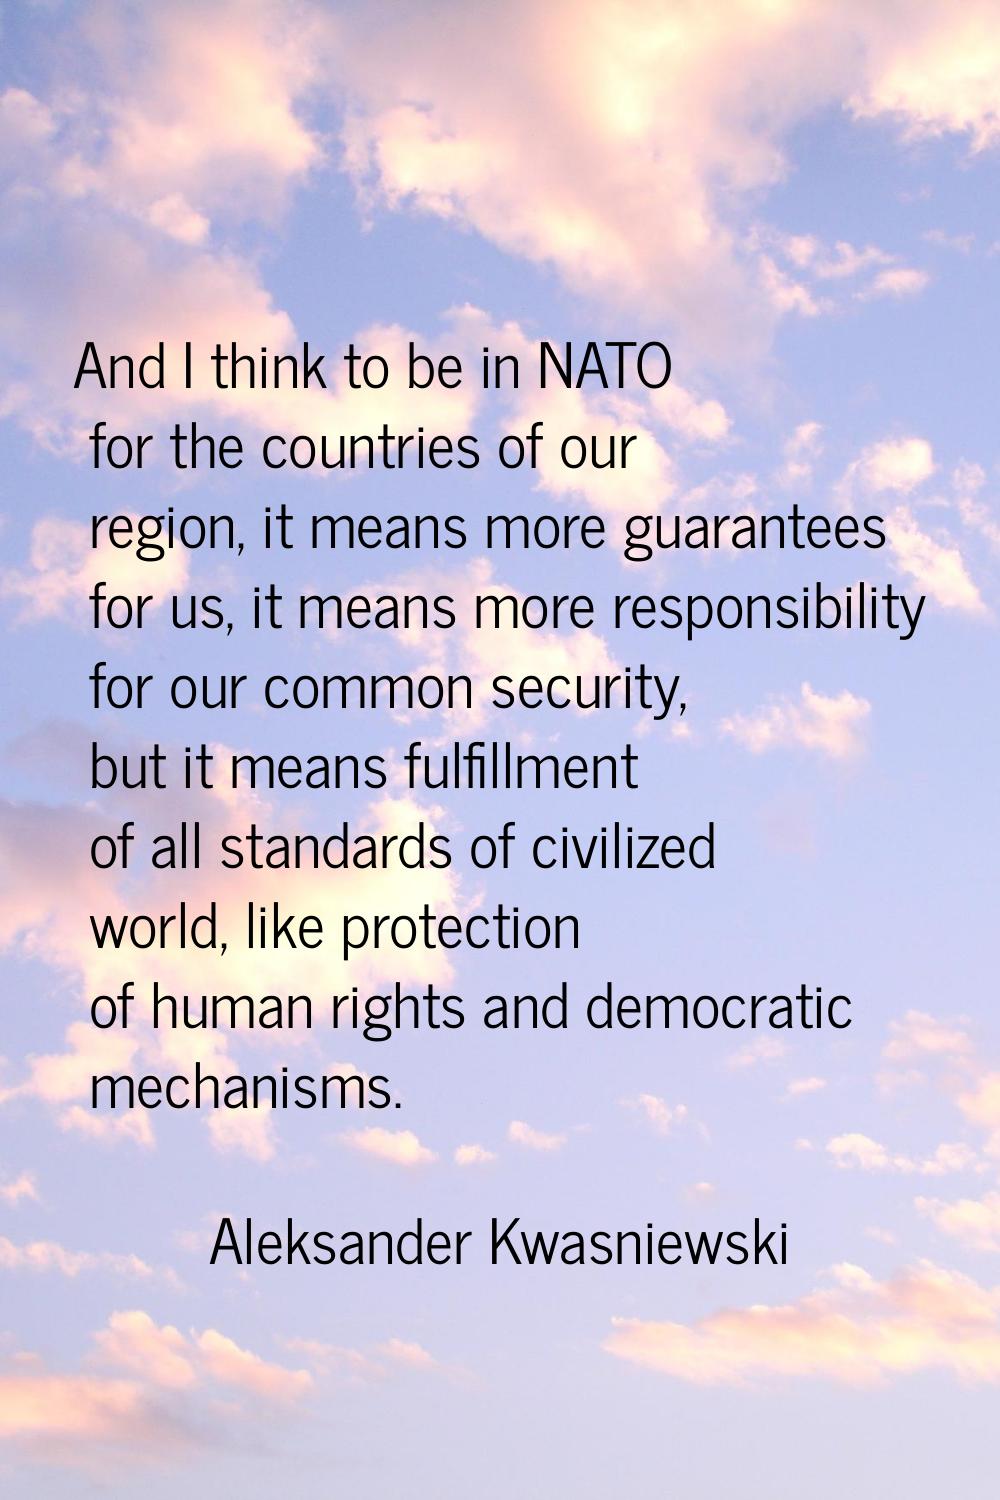 And I think to be in NATO for the countries of our region, it means more guarantees for us, it mean